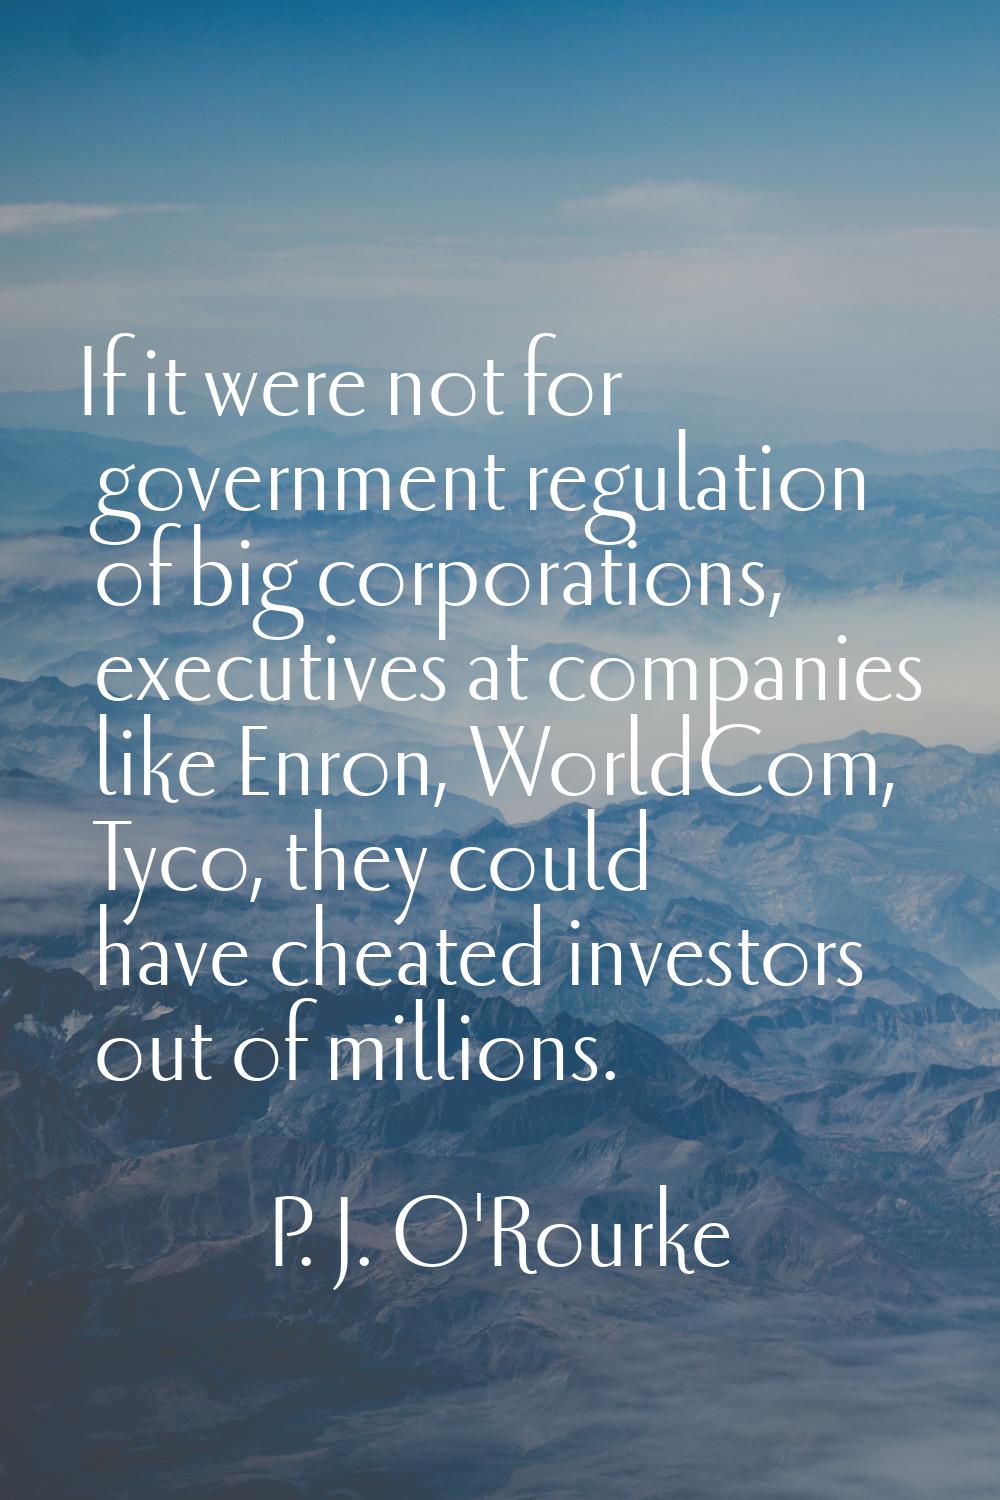 If it were not for government regulation of big corporations, executives at companies like Enron, W